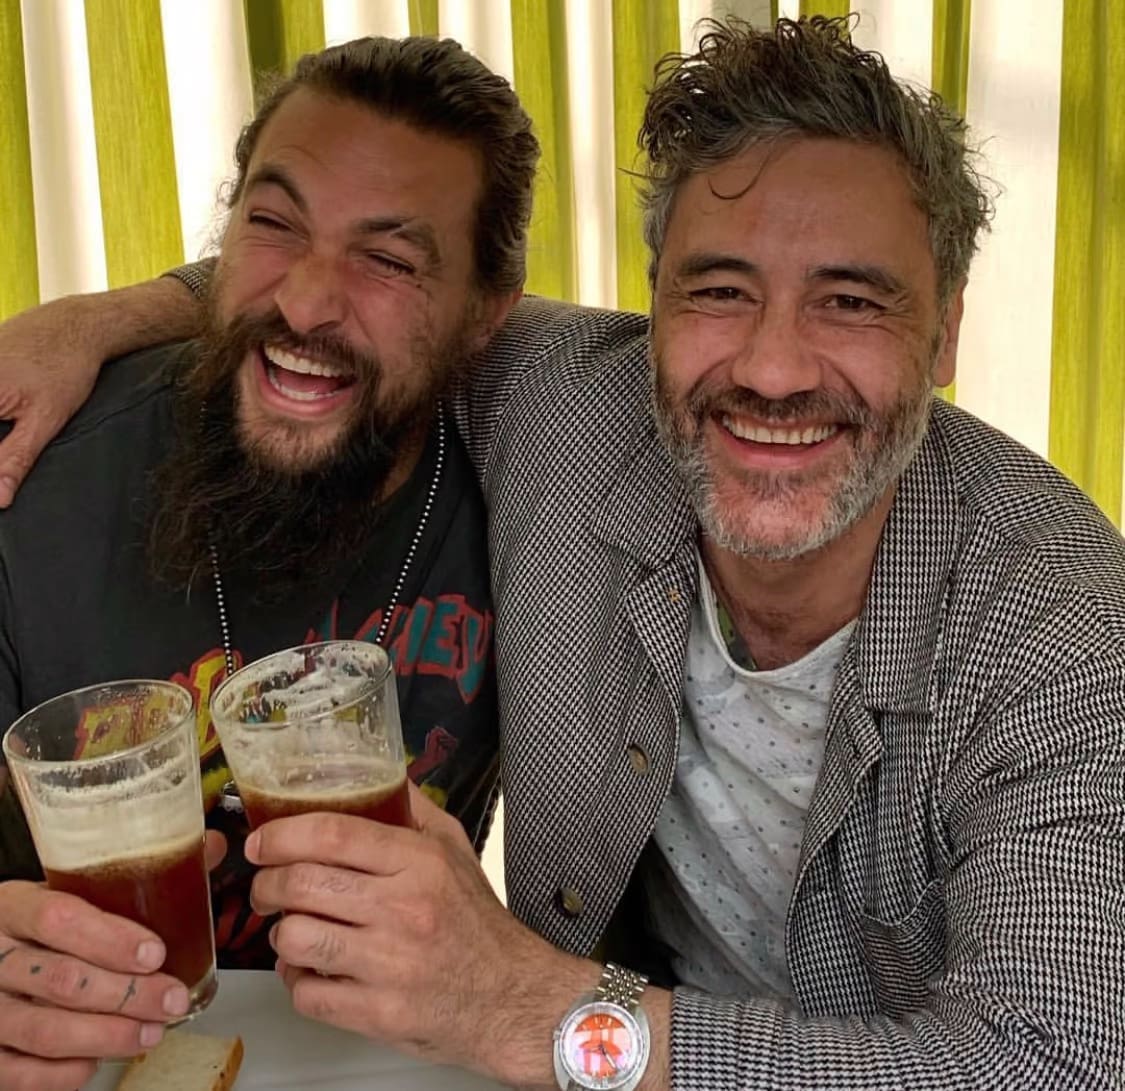 Taika Waititi is a certified watch geek, which makes him even cooler